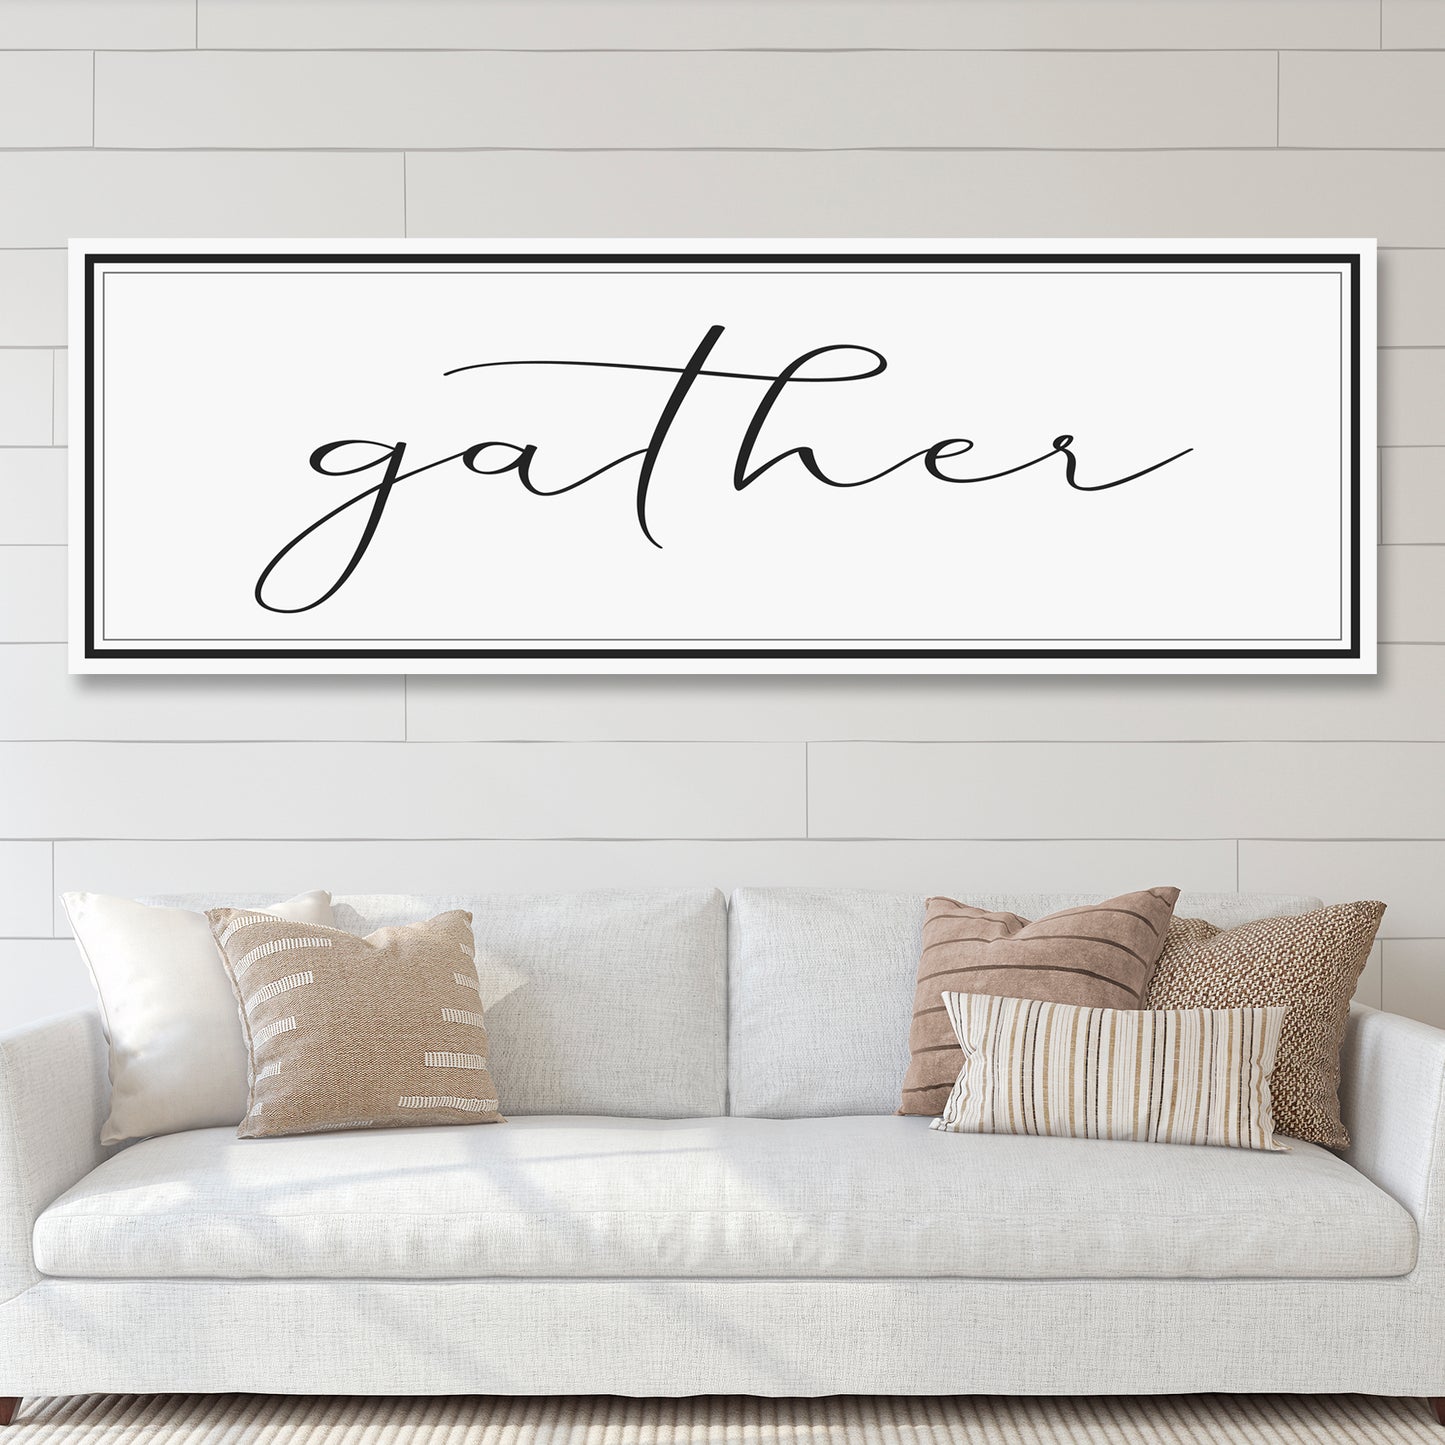 Gather Sign - Image by Tailored Canvases